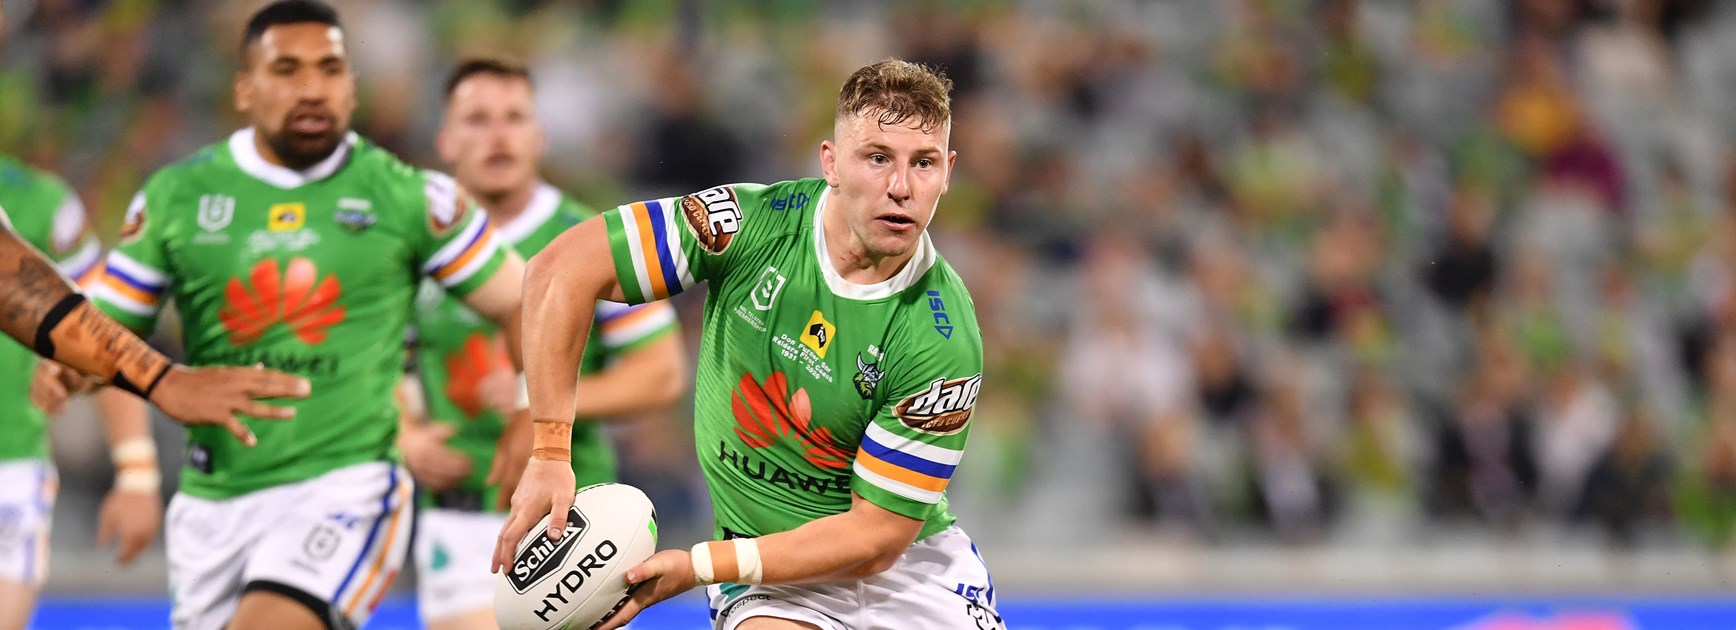 Tale of two halves: Raiders progress after defeating Sharks